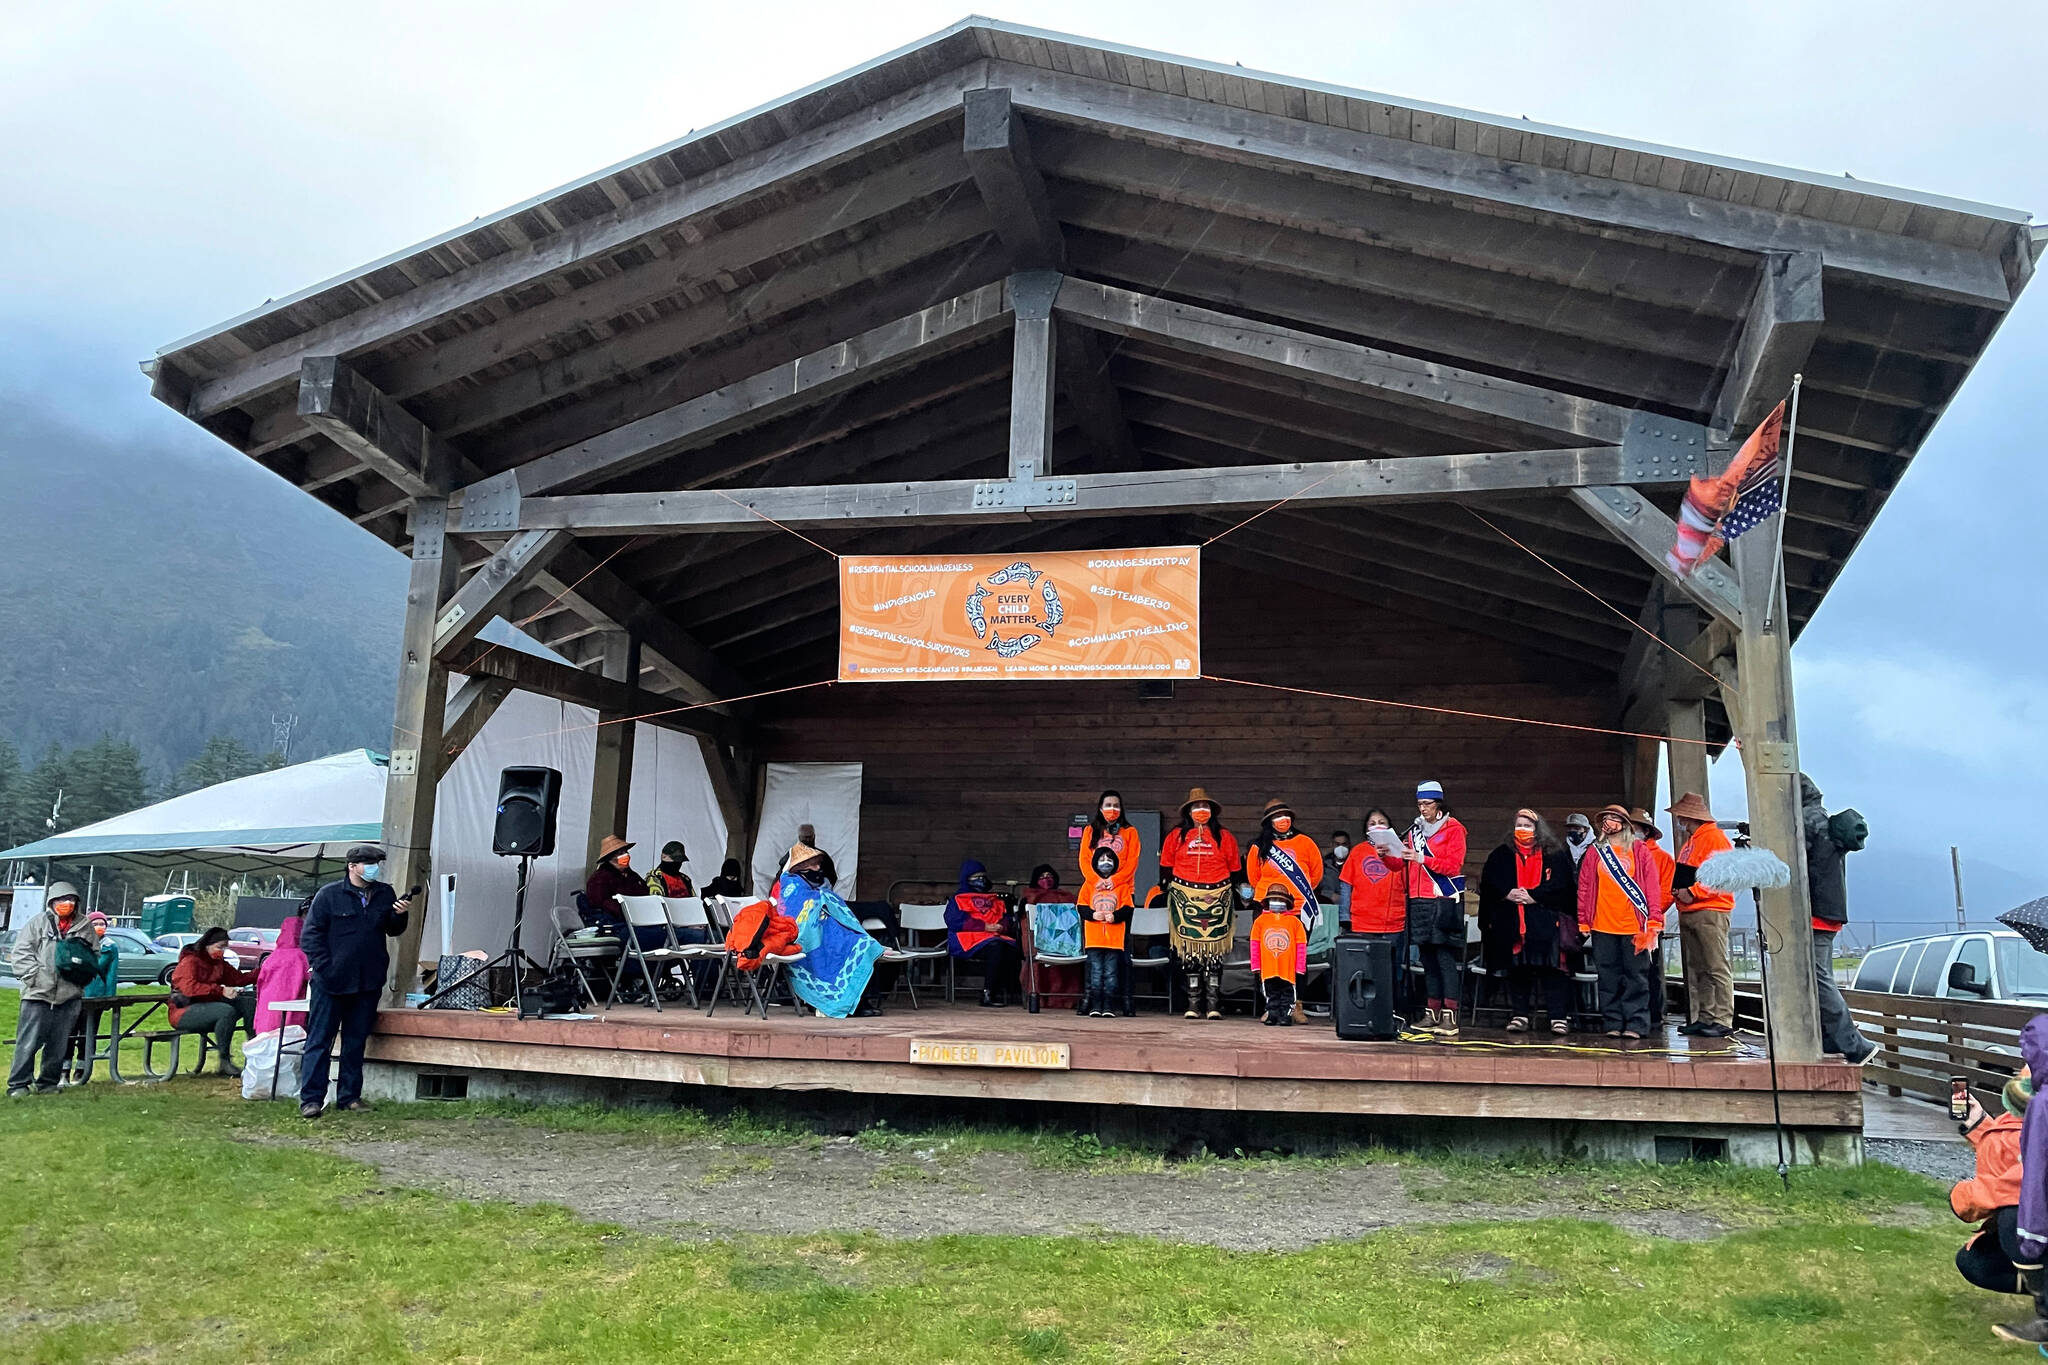 Michael S. Lockett / Juneau Empire 
More than a hundred gathered at an Orange Shirt Day event near Sandy Beach on Sept. 30, 2021, a remembrance of the Indigenous children killed in North America in the residential school system.